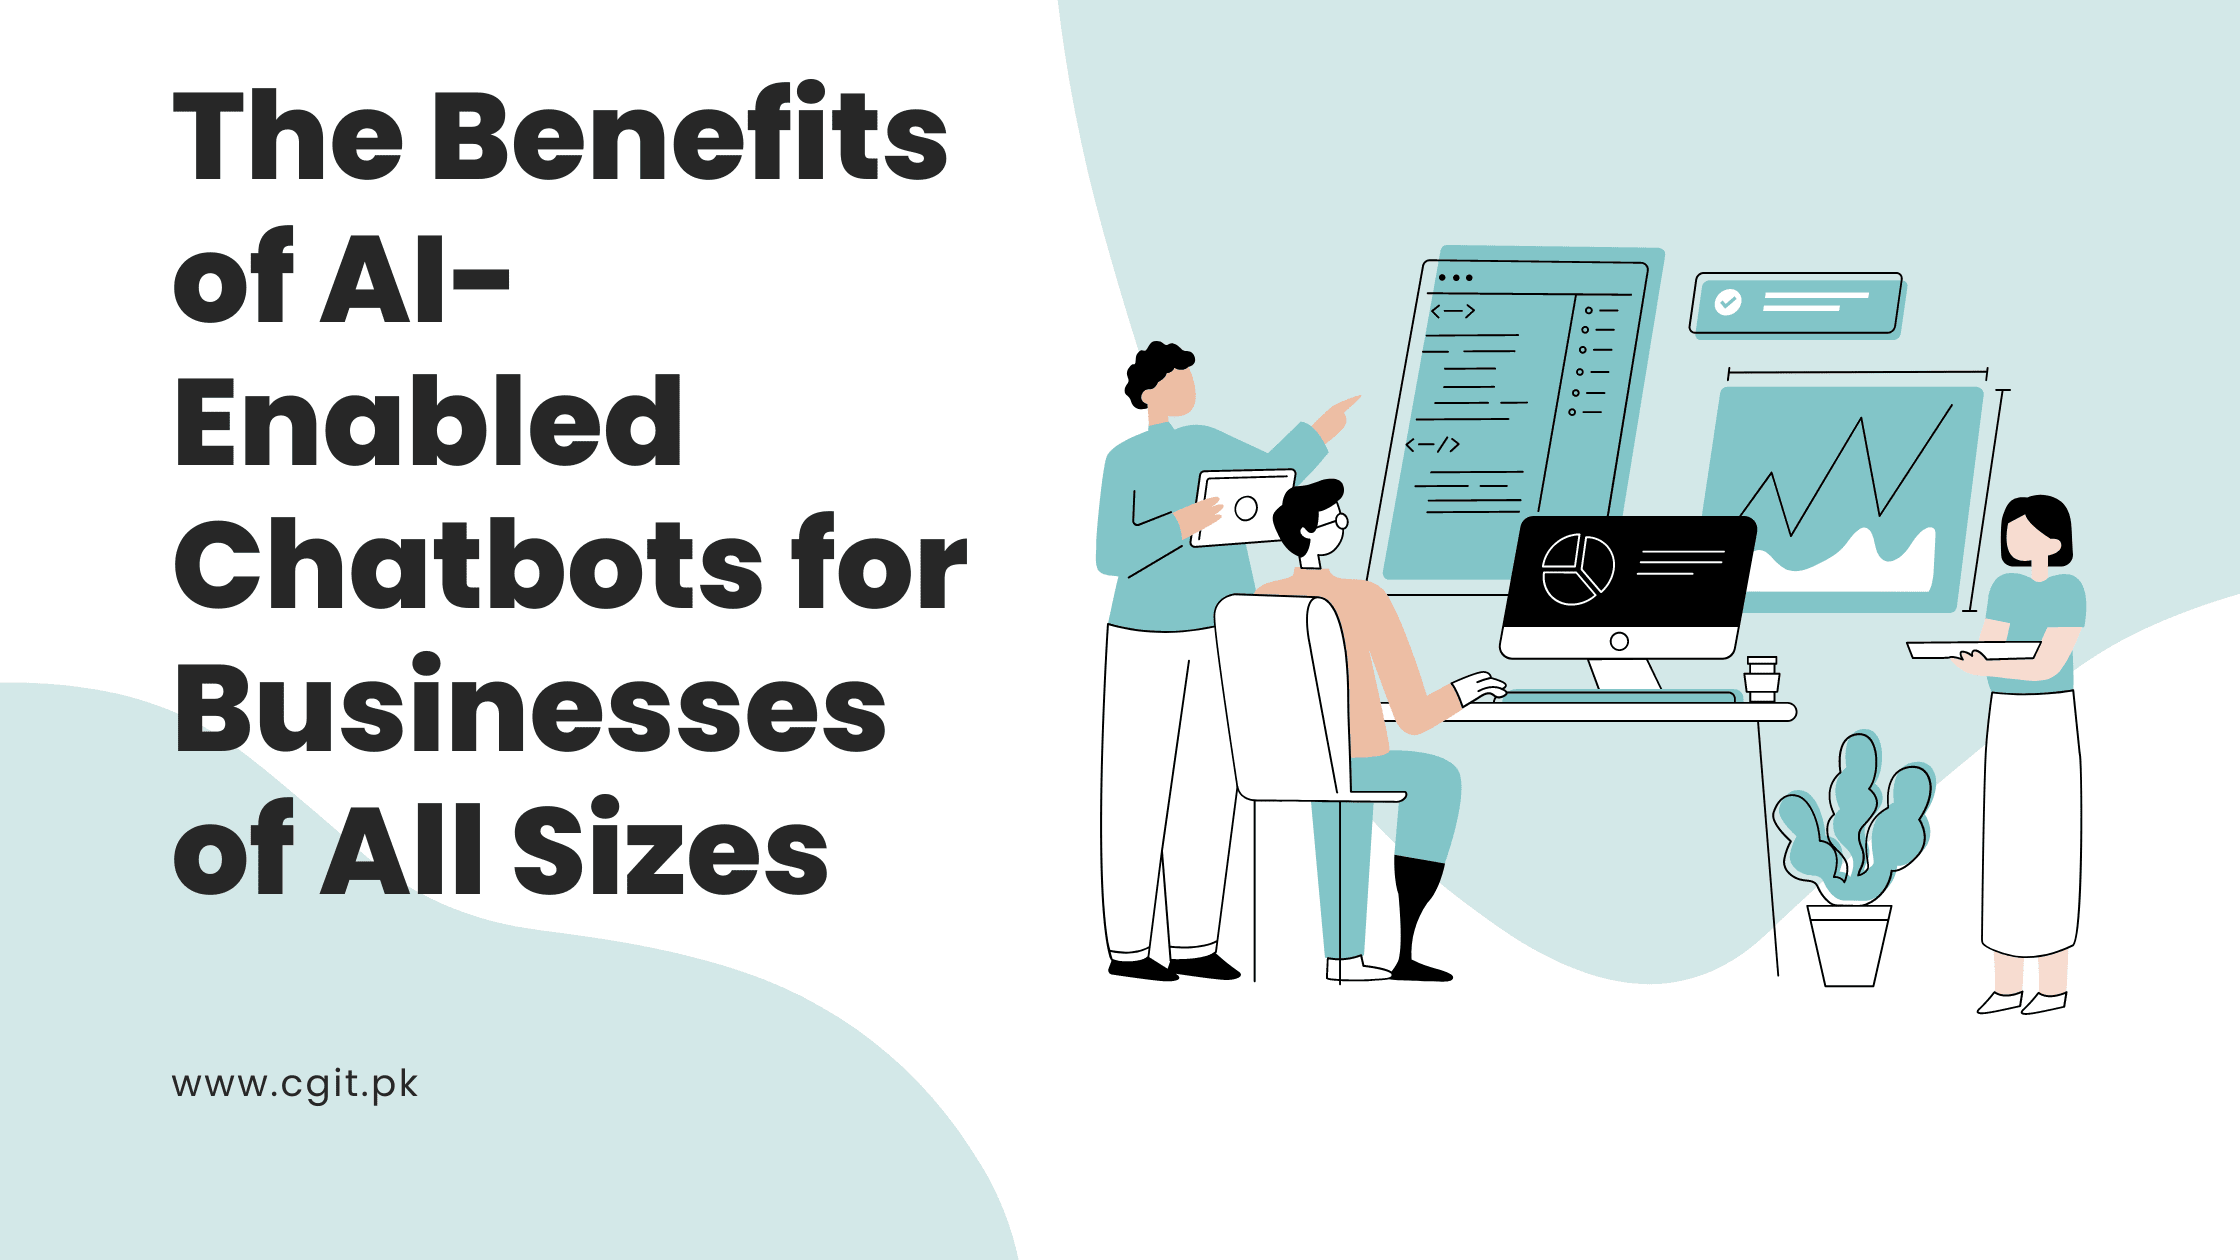 Benefits of Ai-enabled chatbots